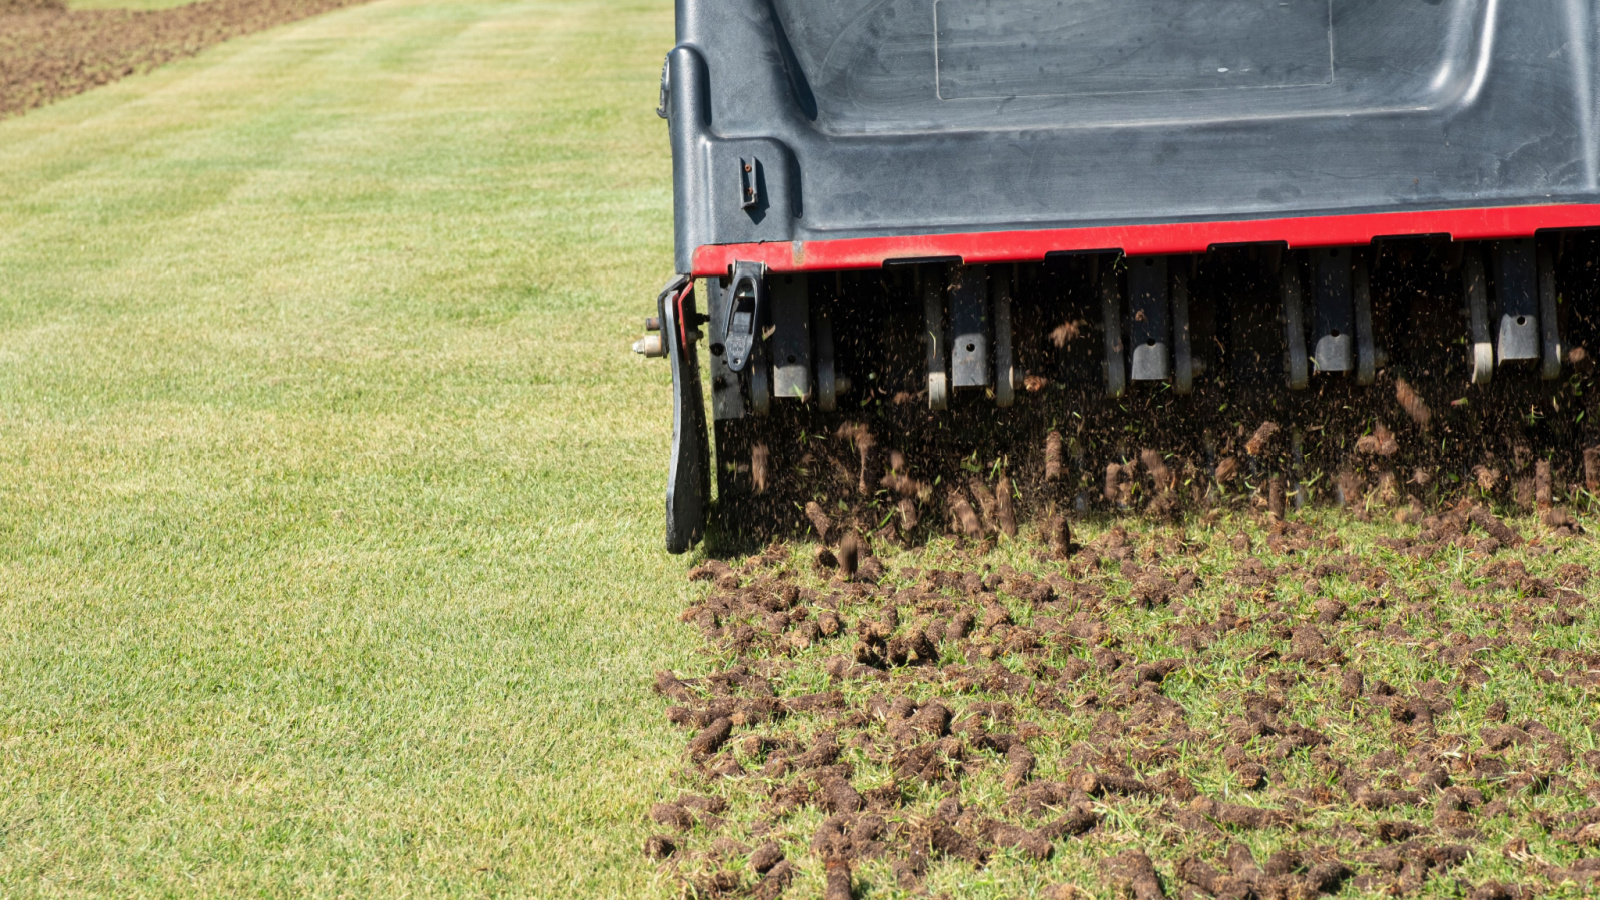 Lawn Aeration Near Me Webster Groves, MO | Lawn Services Near Webster Groves, MO | Lawn Sprinklers of St. Louis